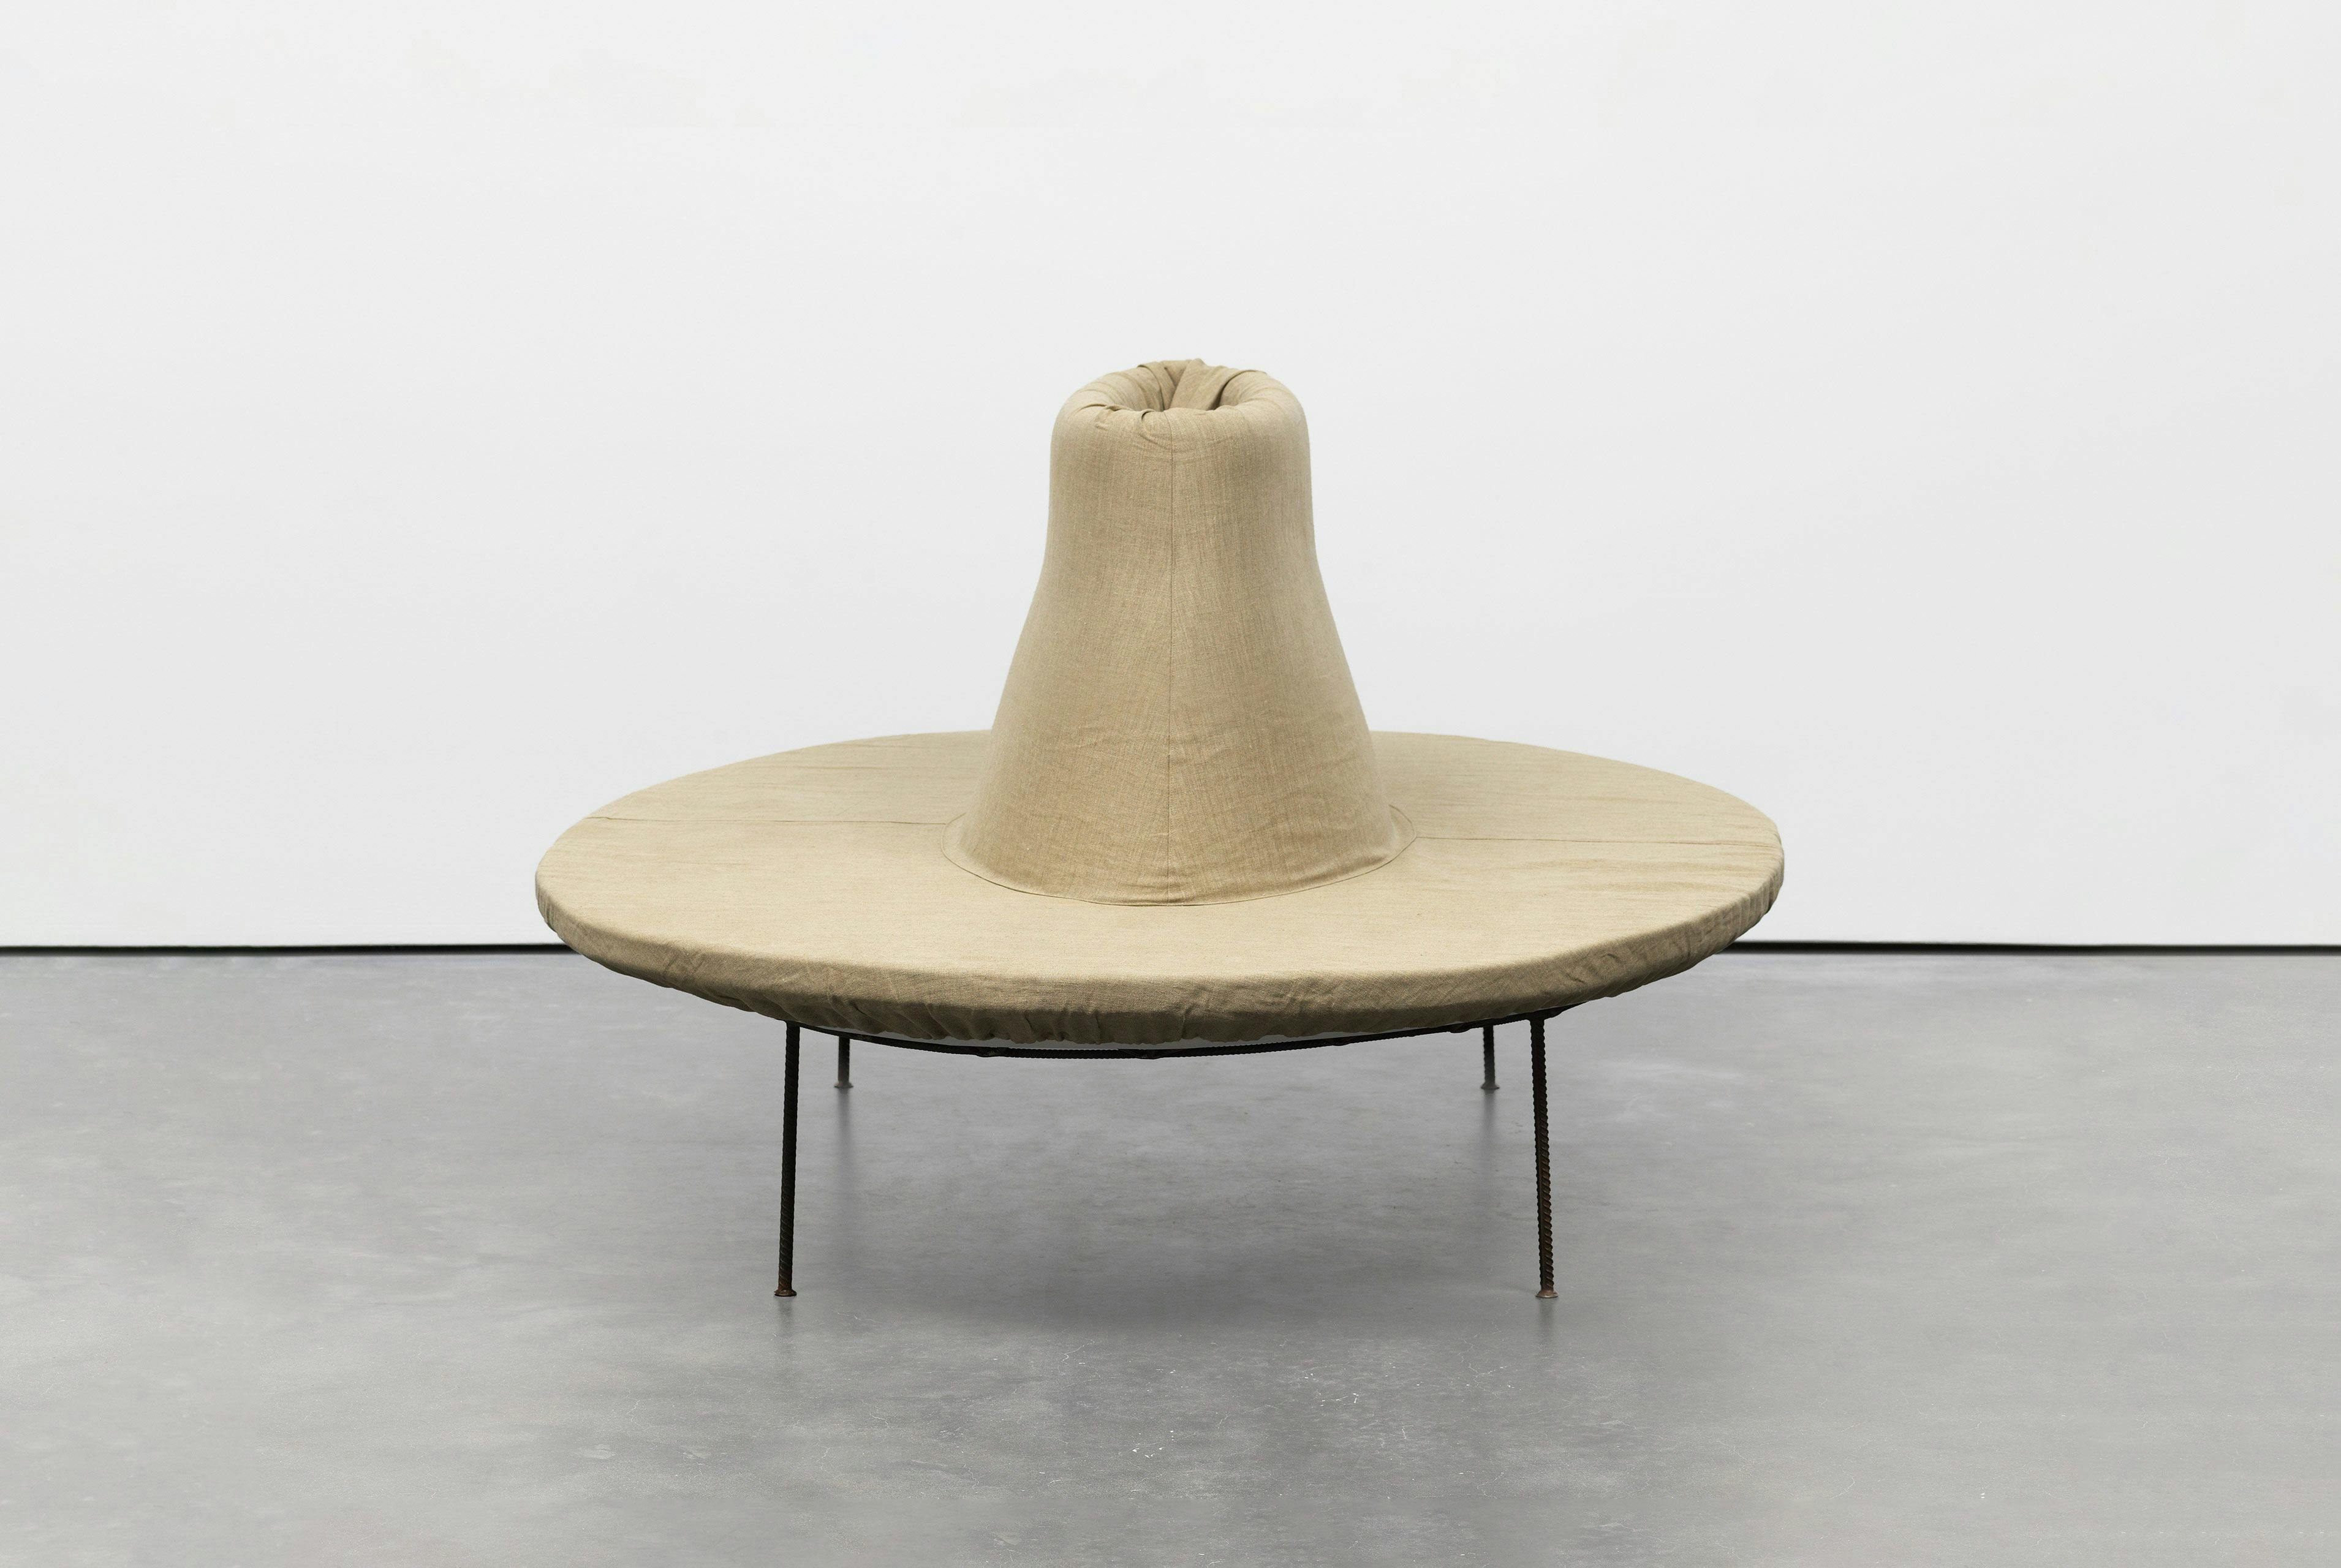 A piece of furniture by Franz West, titled Pouf, dated 2000.